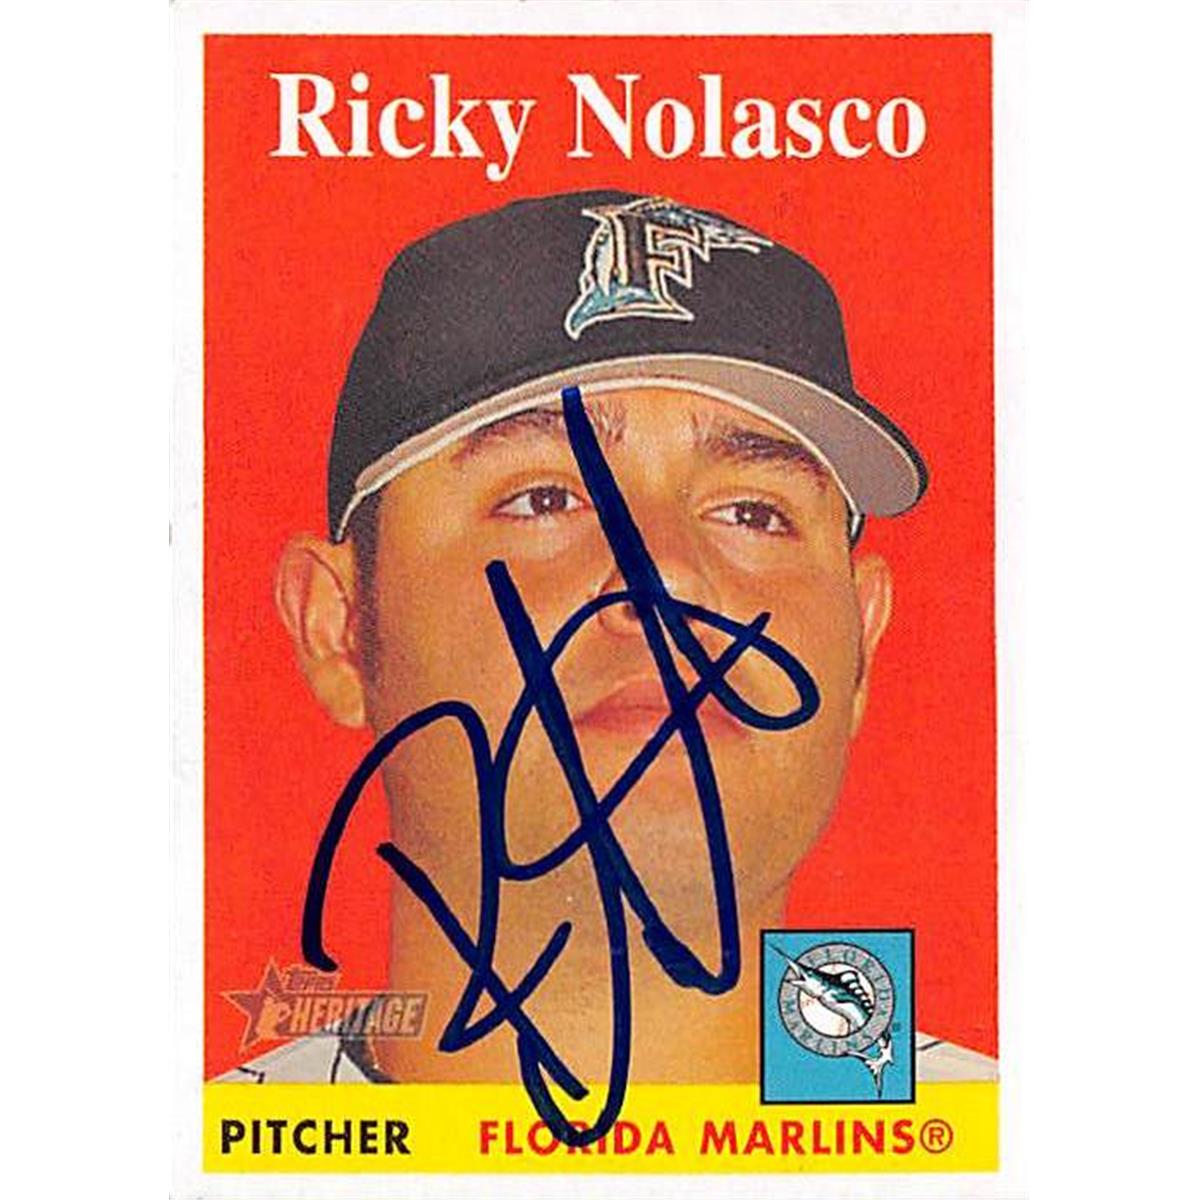 Autograph Warehouse 444083 Ricky Nolasco Autographed Baseball Card 2007 Topps Heritage No. 399 for Florida Marlins